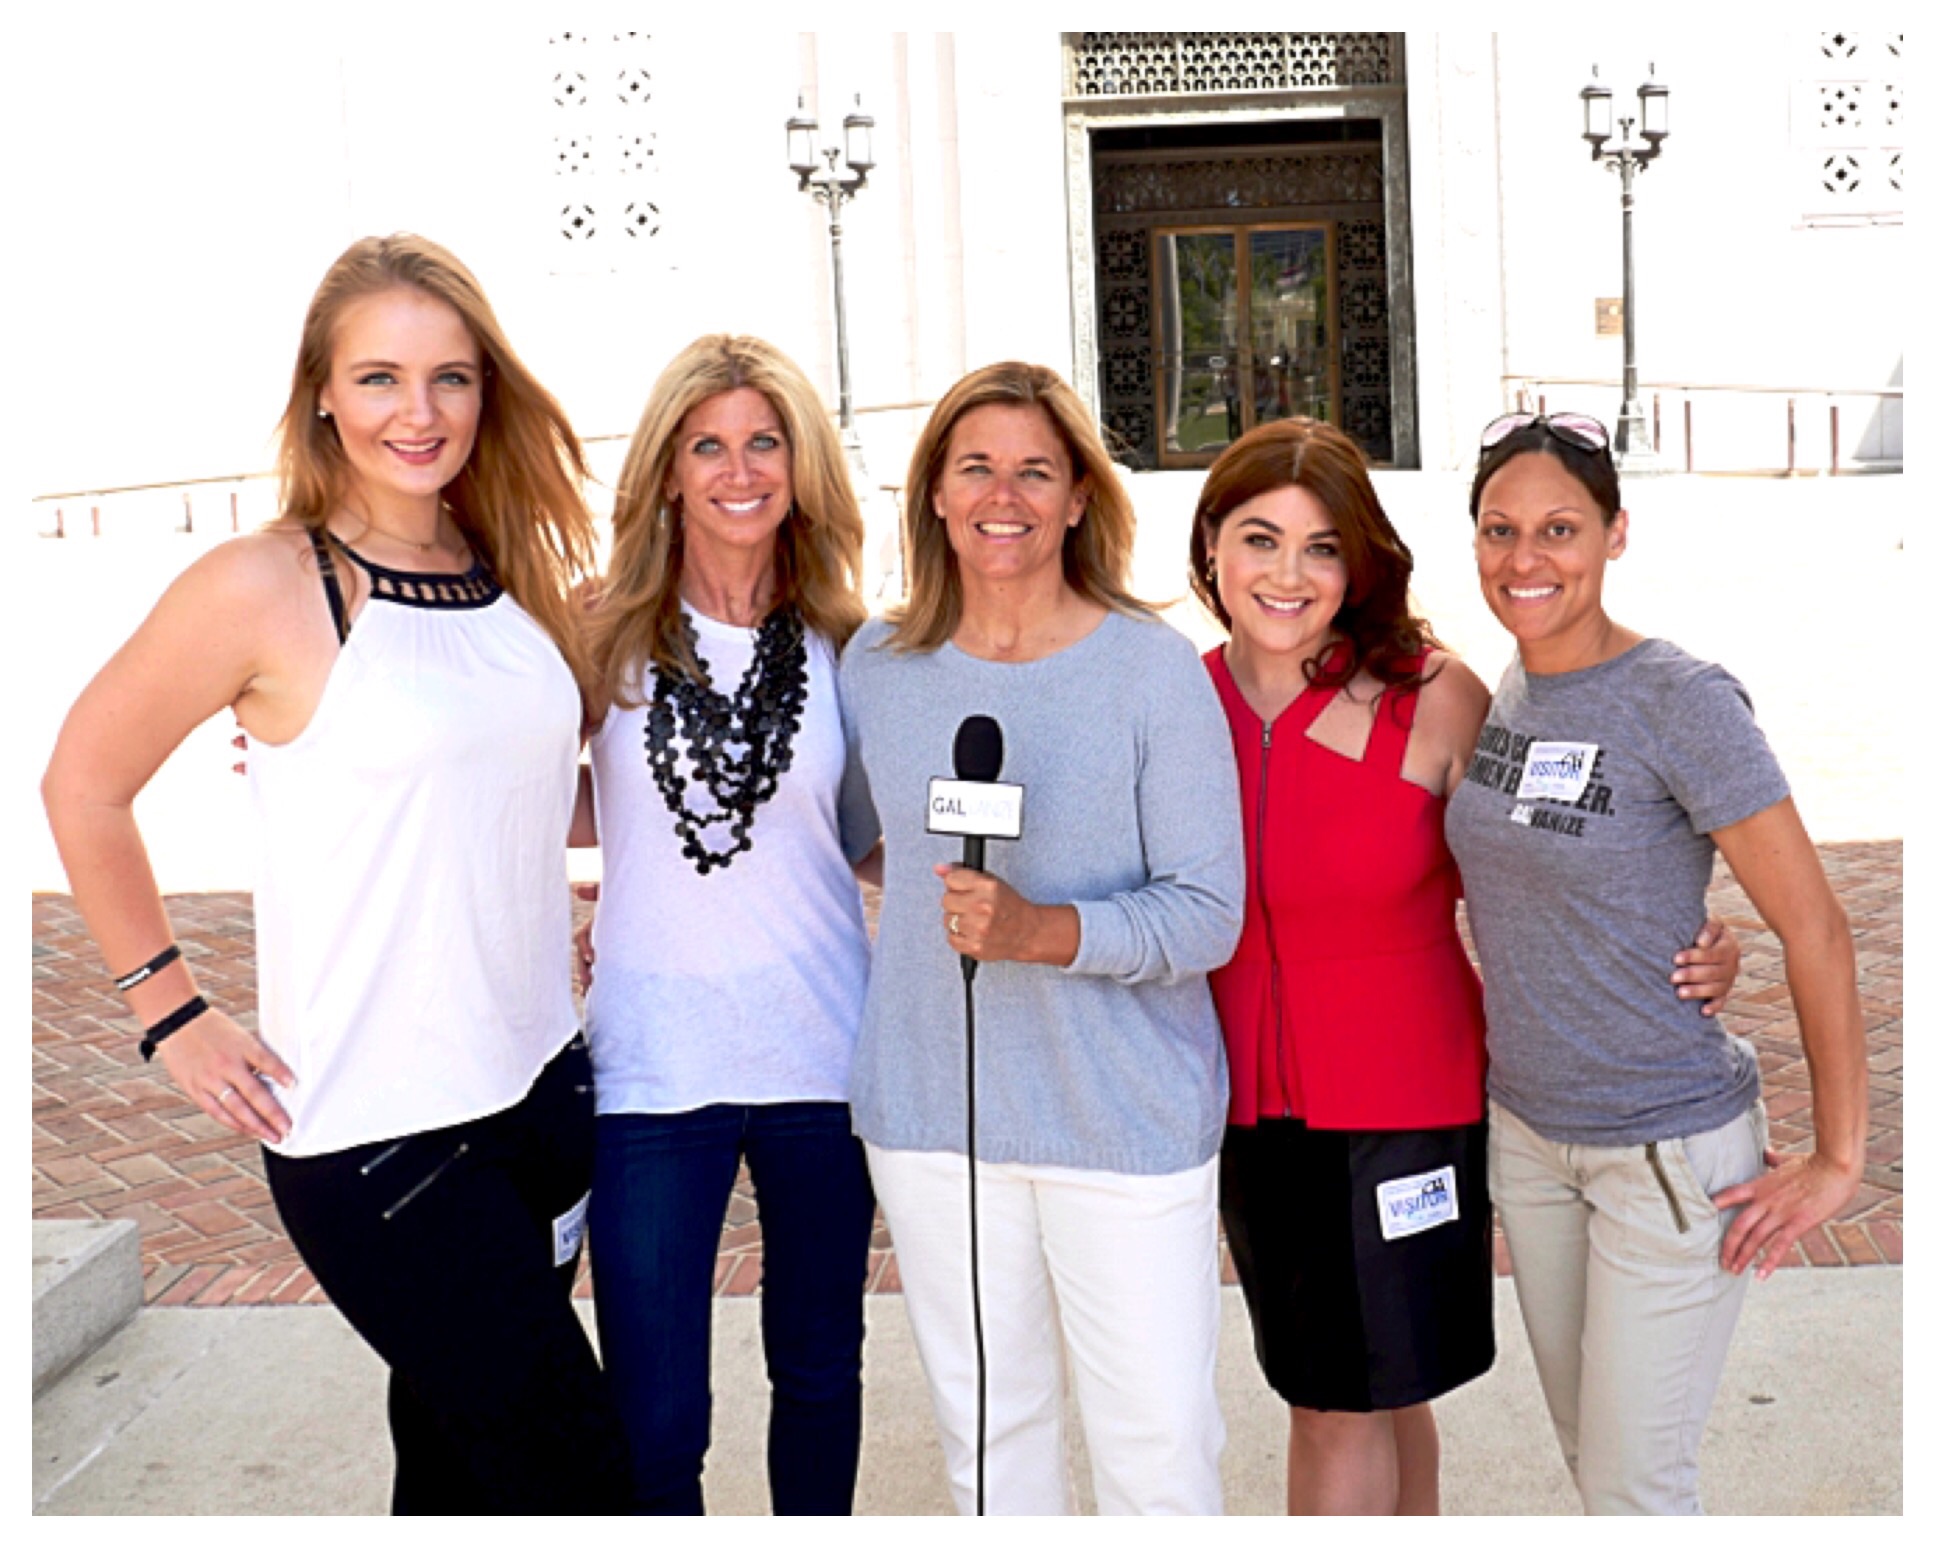 Fox Sports NFL sideline reporter, Laura Okmin, to the left, teaching us how to GALvanize in Los Angeles!